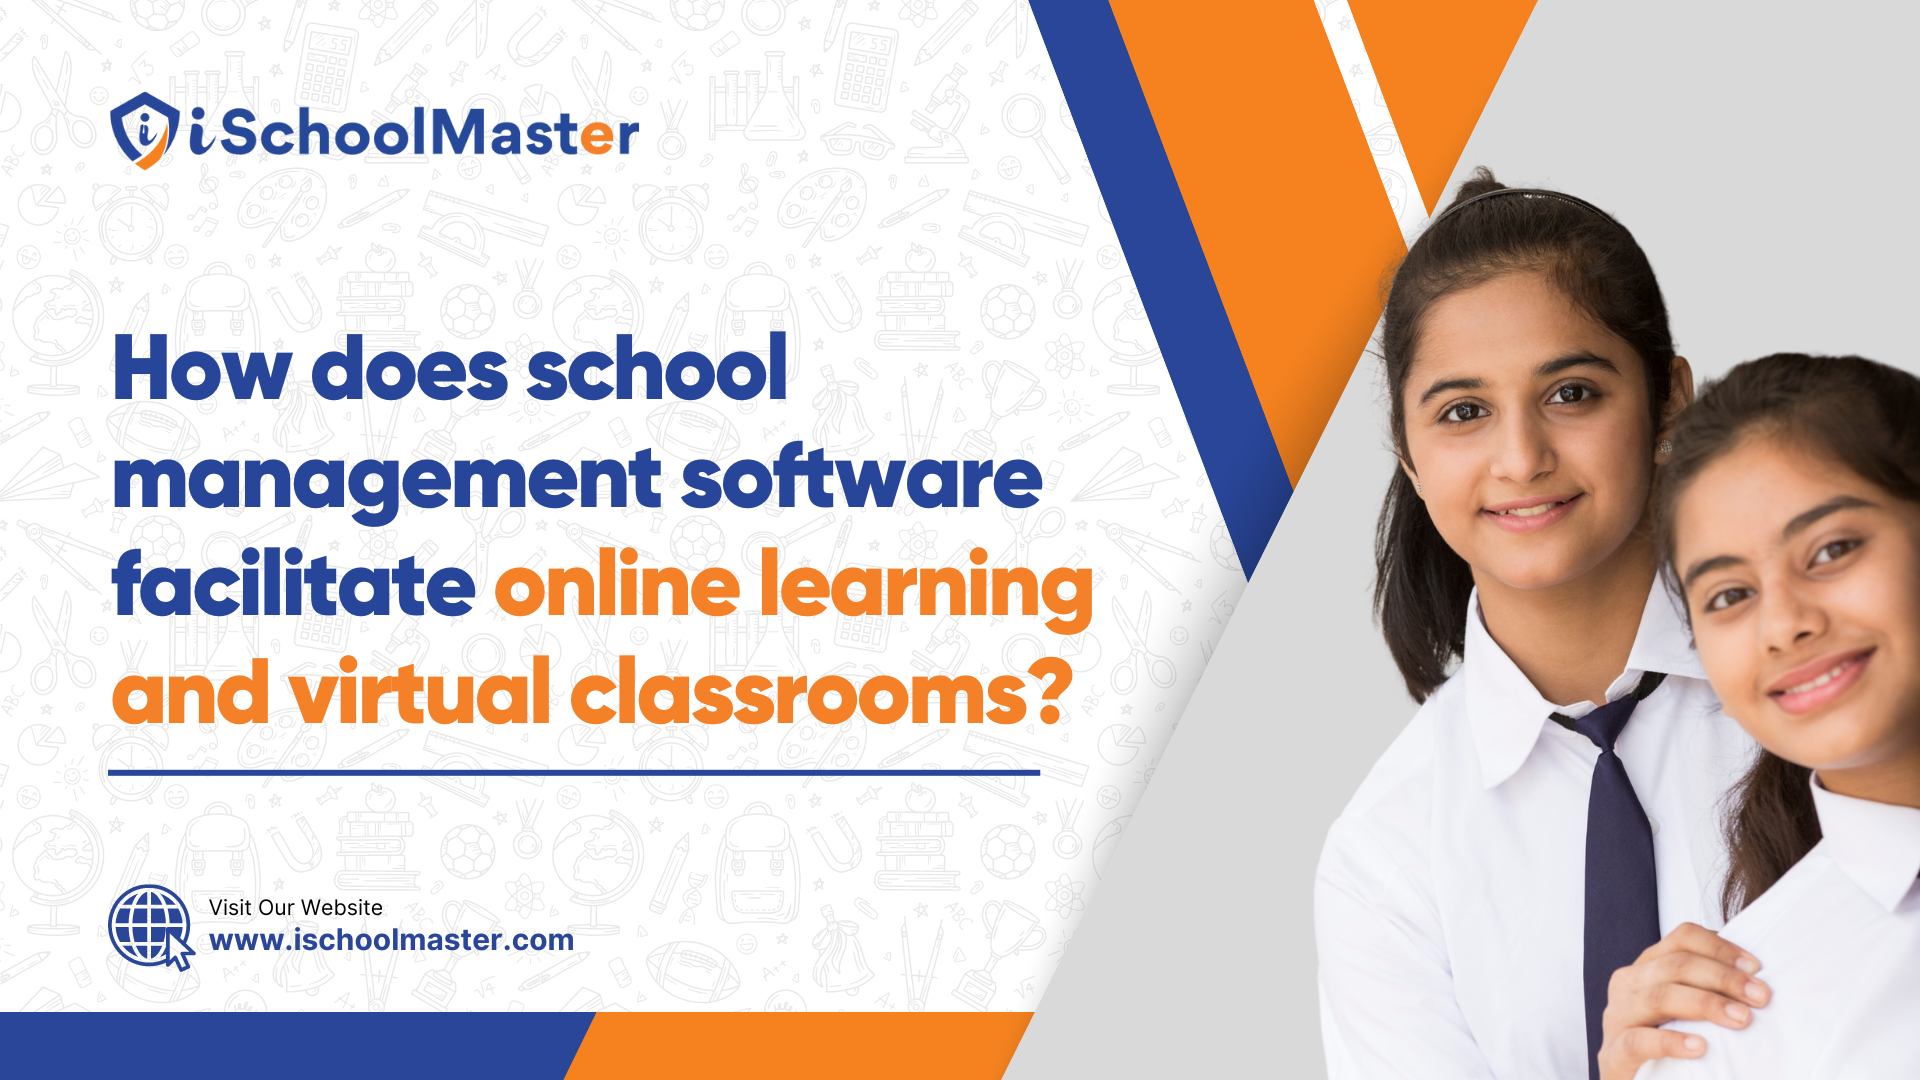 How does school management software facilitate online learning and virtual classrooms?